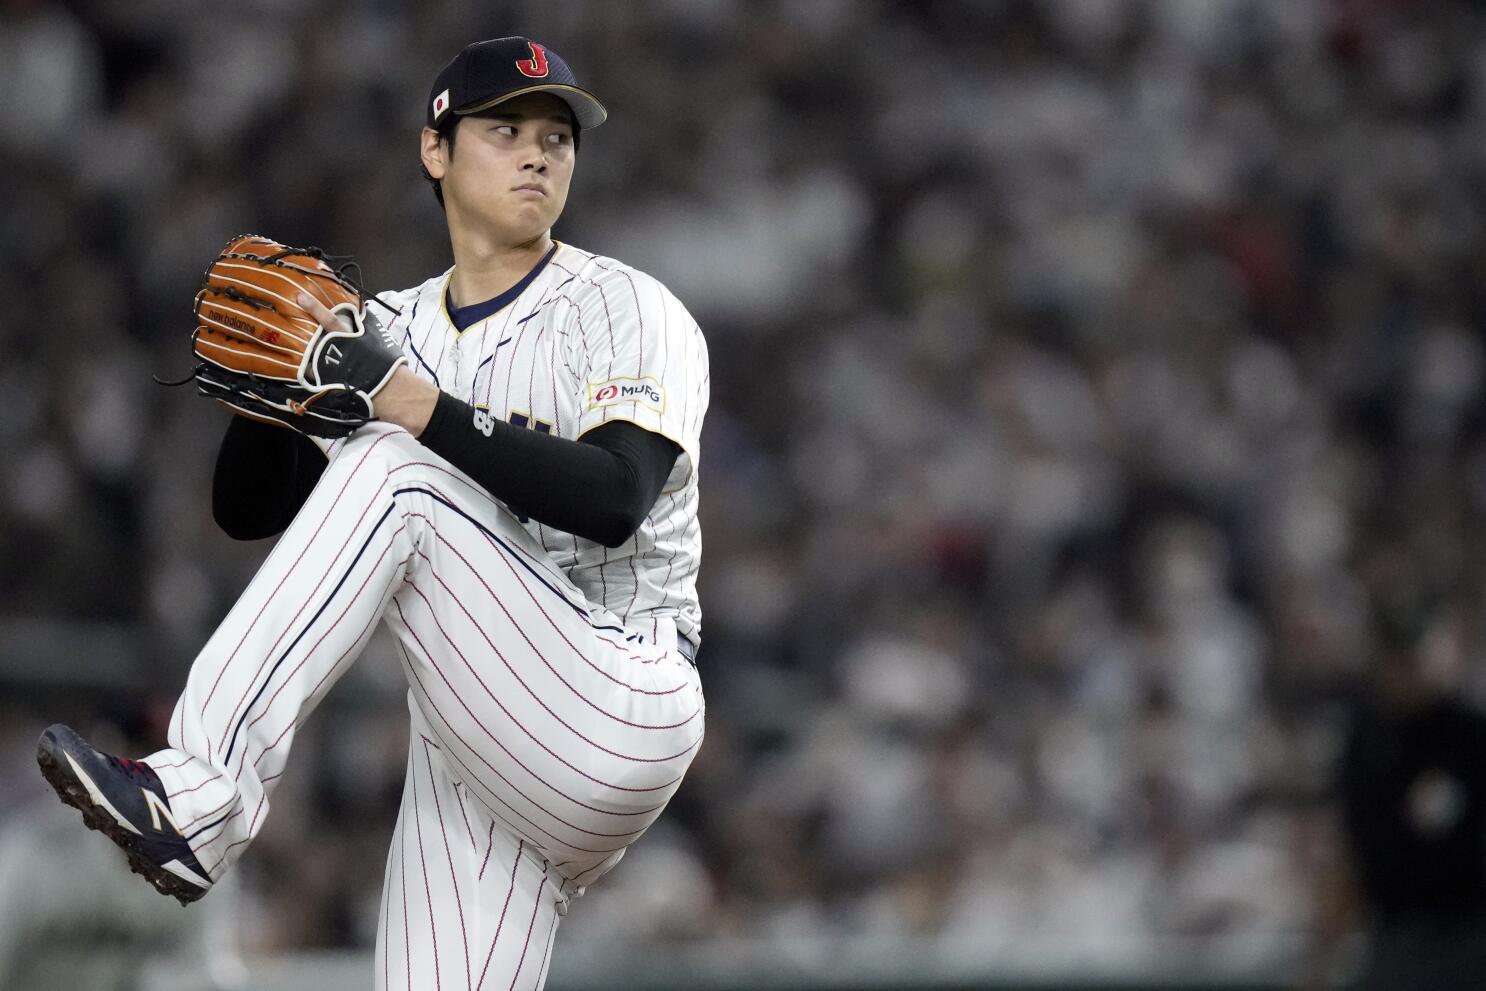 Shohei Ohtani willing to relieve if Japan reaches WBC final - The